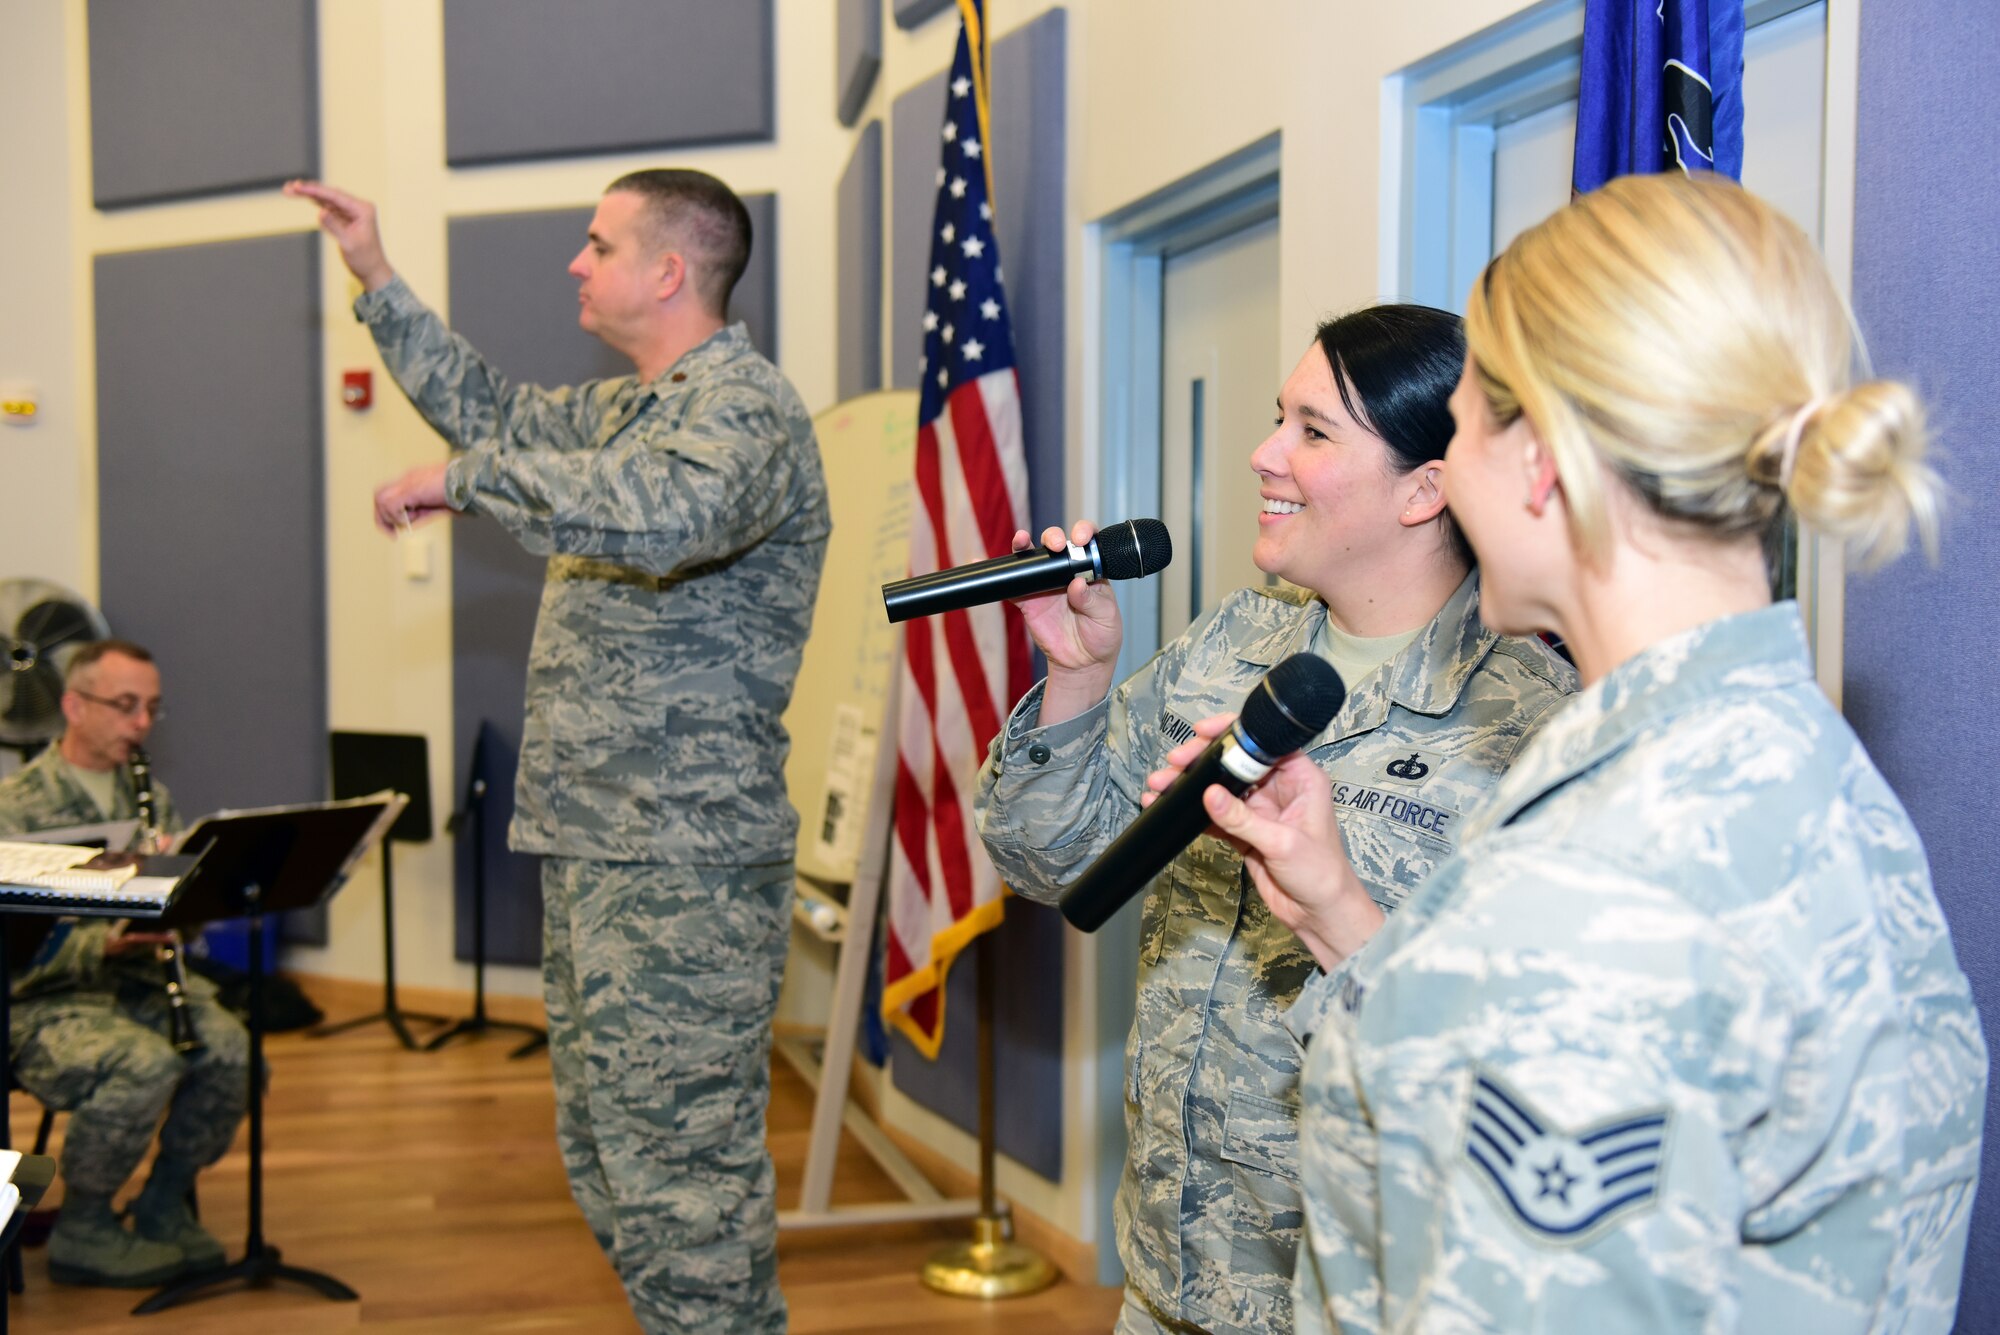 Tech. Sgt. Amy Chicavich (center) and Staff Sgt. Megan May (right), vocalists with the Air National Guard Band of the Northeast, and Maj. Joseph Denti (left), commander and conductor of the band, rehearse Nov. 17, 2018, for the band’s annual holiday concert. The concert is scheduled for Dec. 16 at the Auditorium of the Scottish Rite Cathedral, Harrisburg, Pennsylvania, at 3 p.m. and will feature the 35-piece wind-ensemble Concert Band performing several winter and holiday-themed songs. (U.S. Air National Guard photo by Tech. Sgt. Claire Behney/Released)